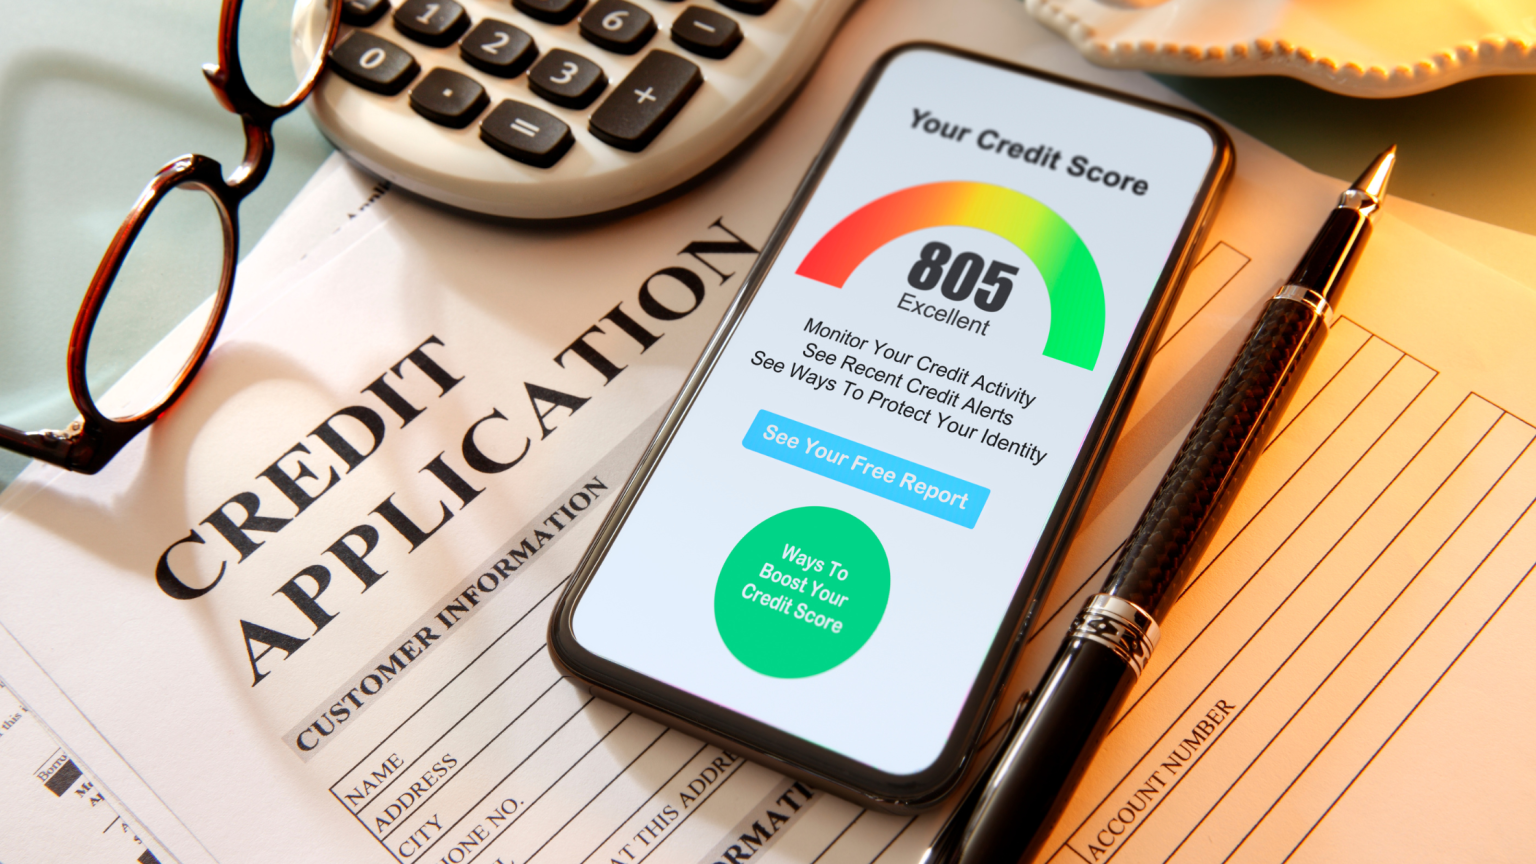 Your Credit Score: What is it and Why it Matters